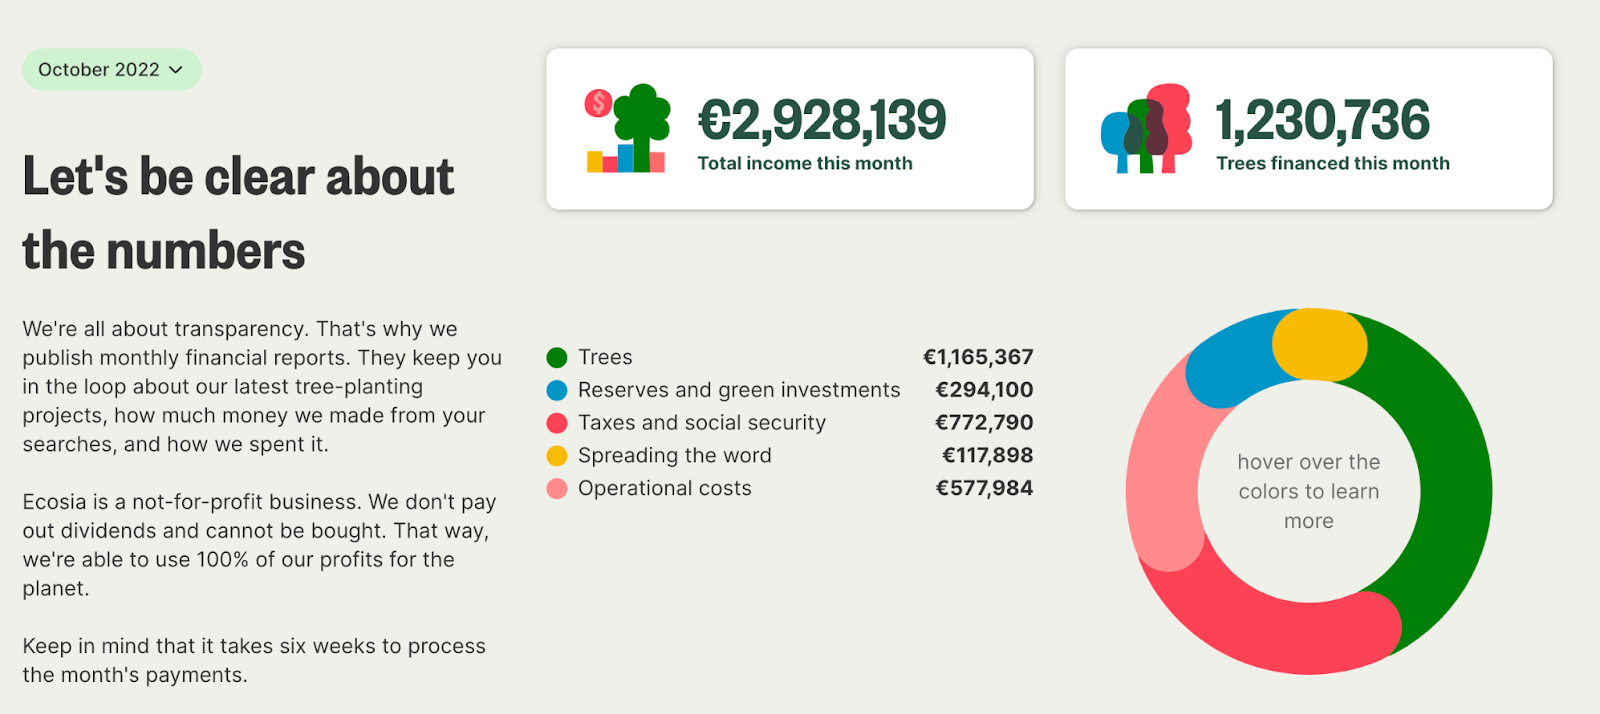 Screenshot of the october financial reports from the Ecosia blog